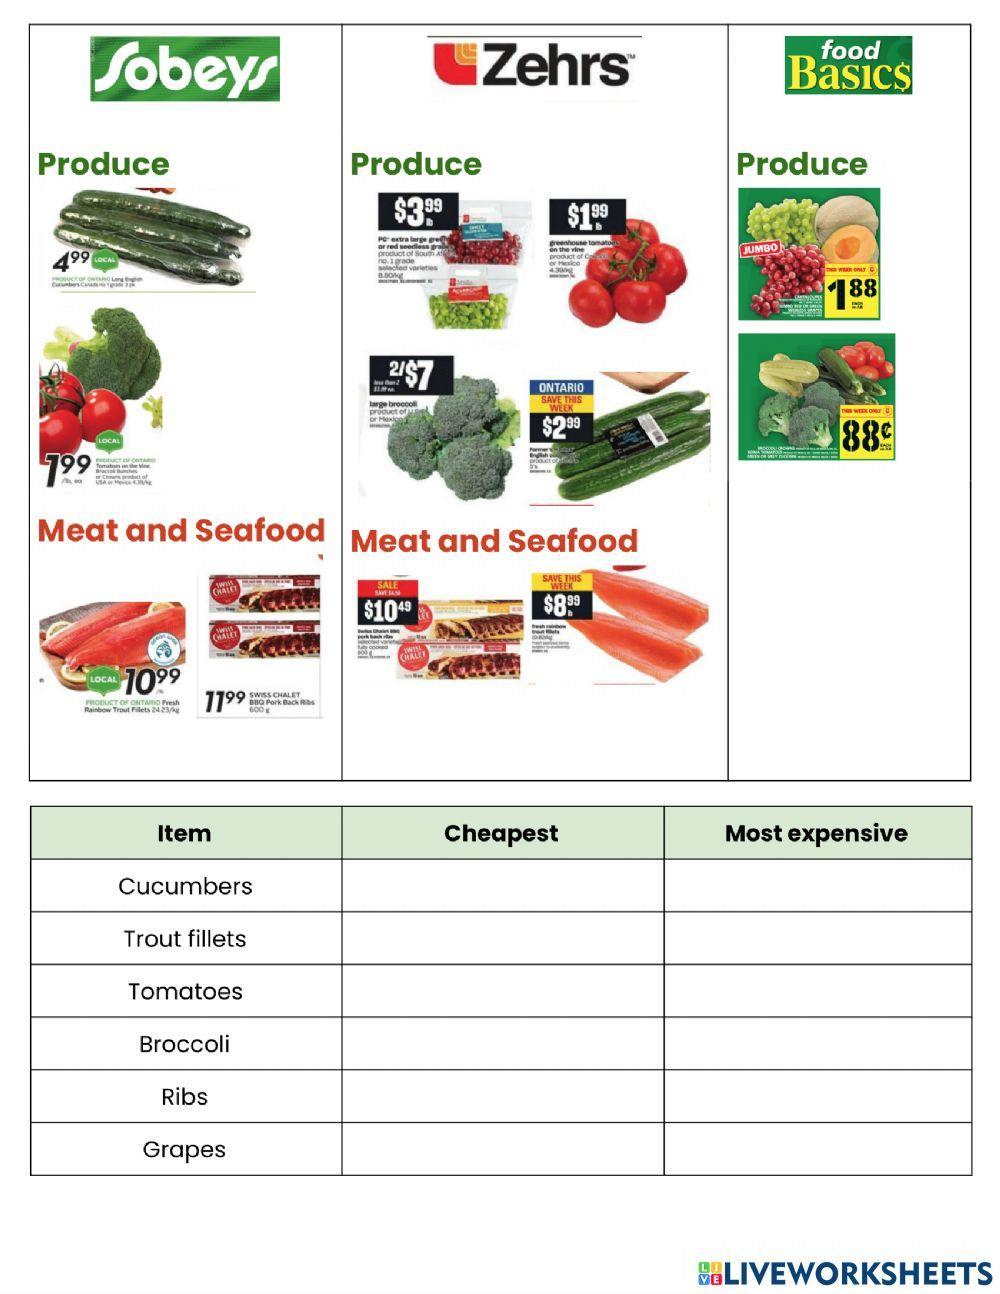 Compare Grocery Flyer Prices